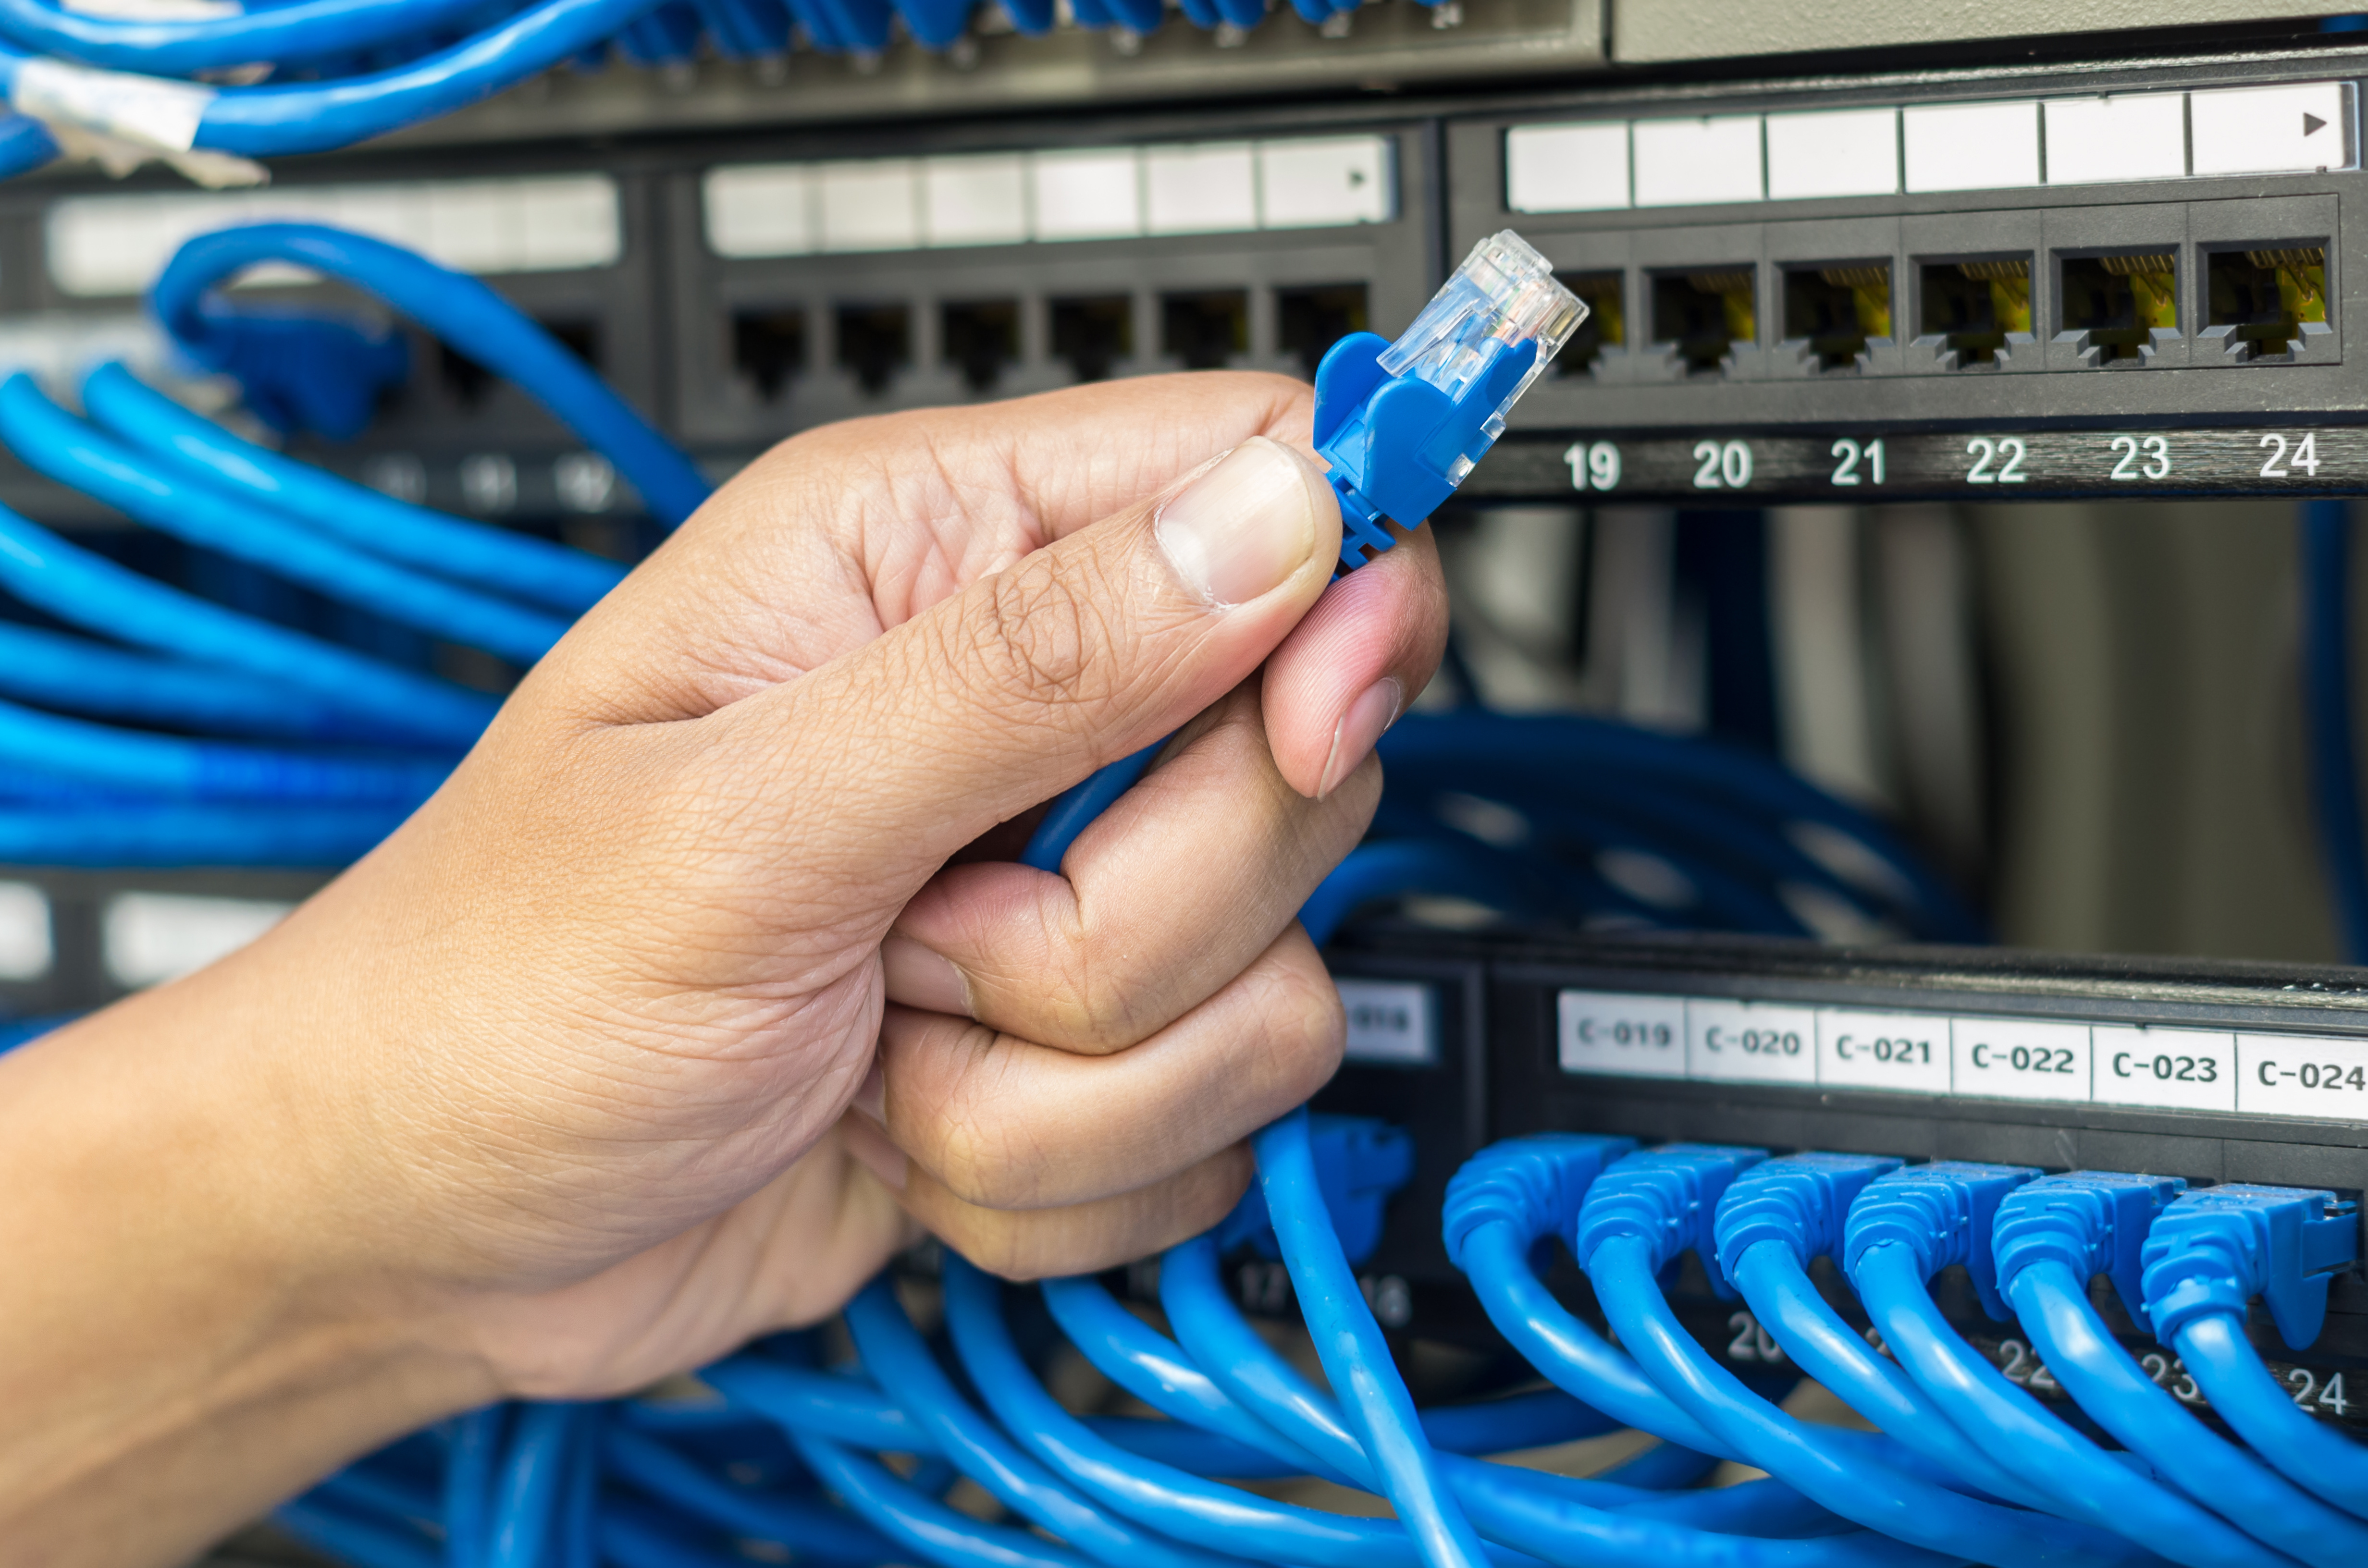 Hand Holding Network Cable Connection to Router and Switch Hub in Server Room